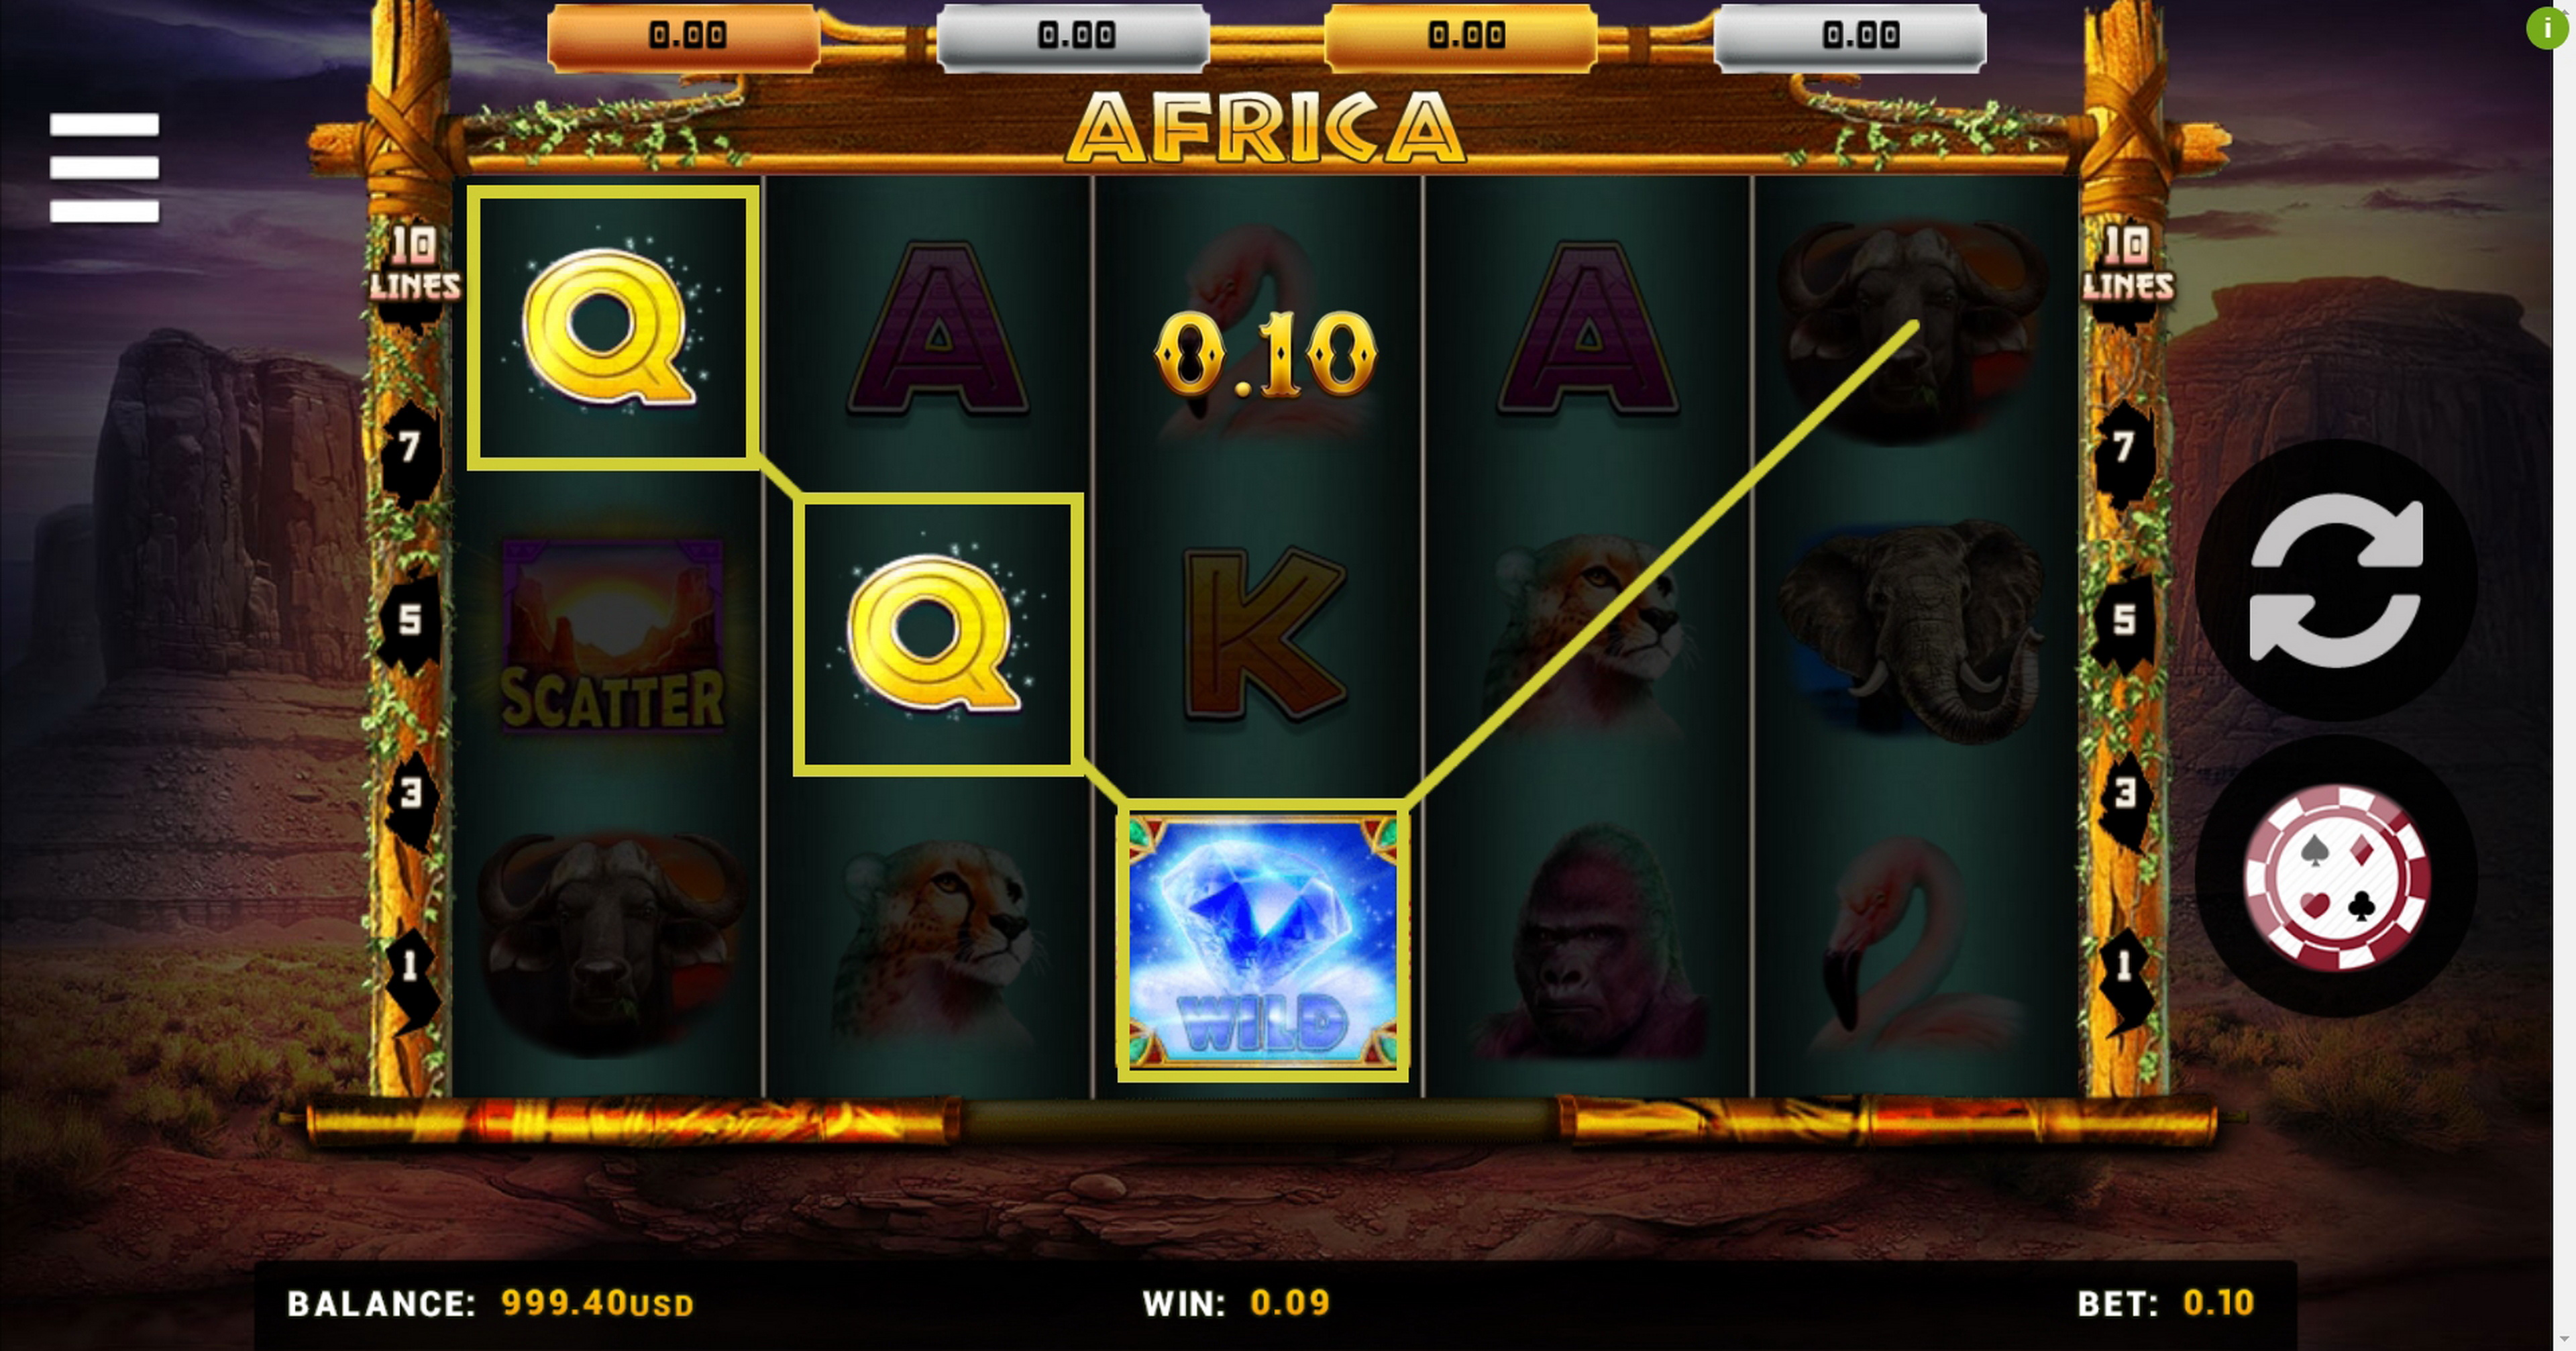 Win Money in Africa Free Slot Game by Betsense